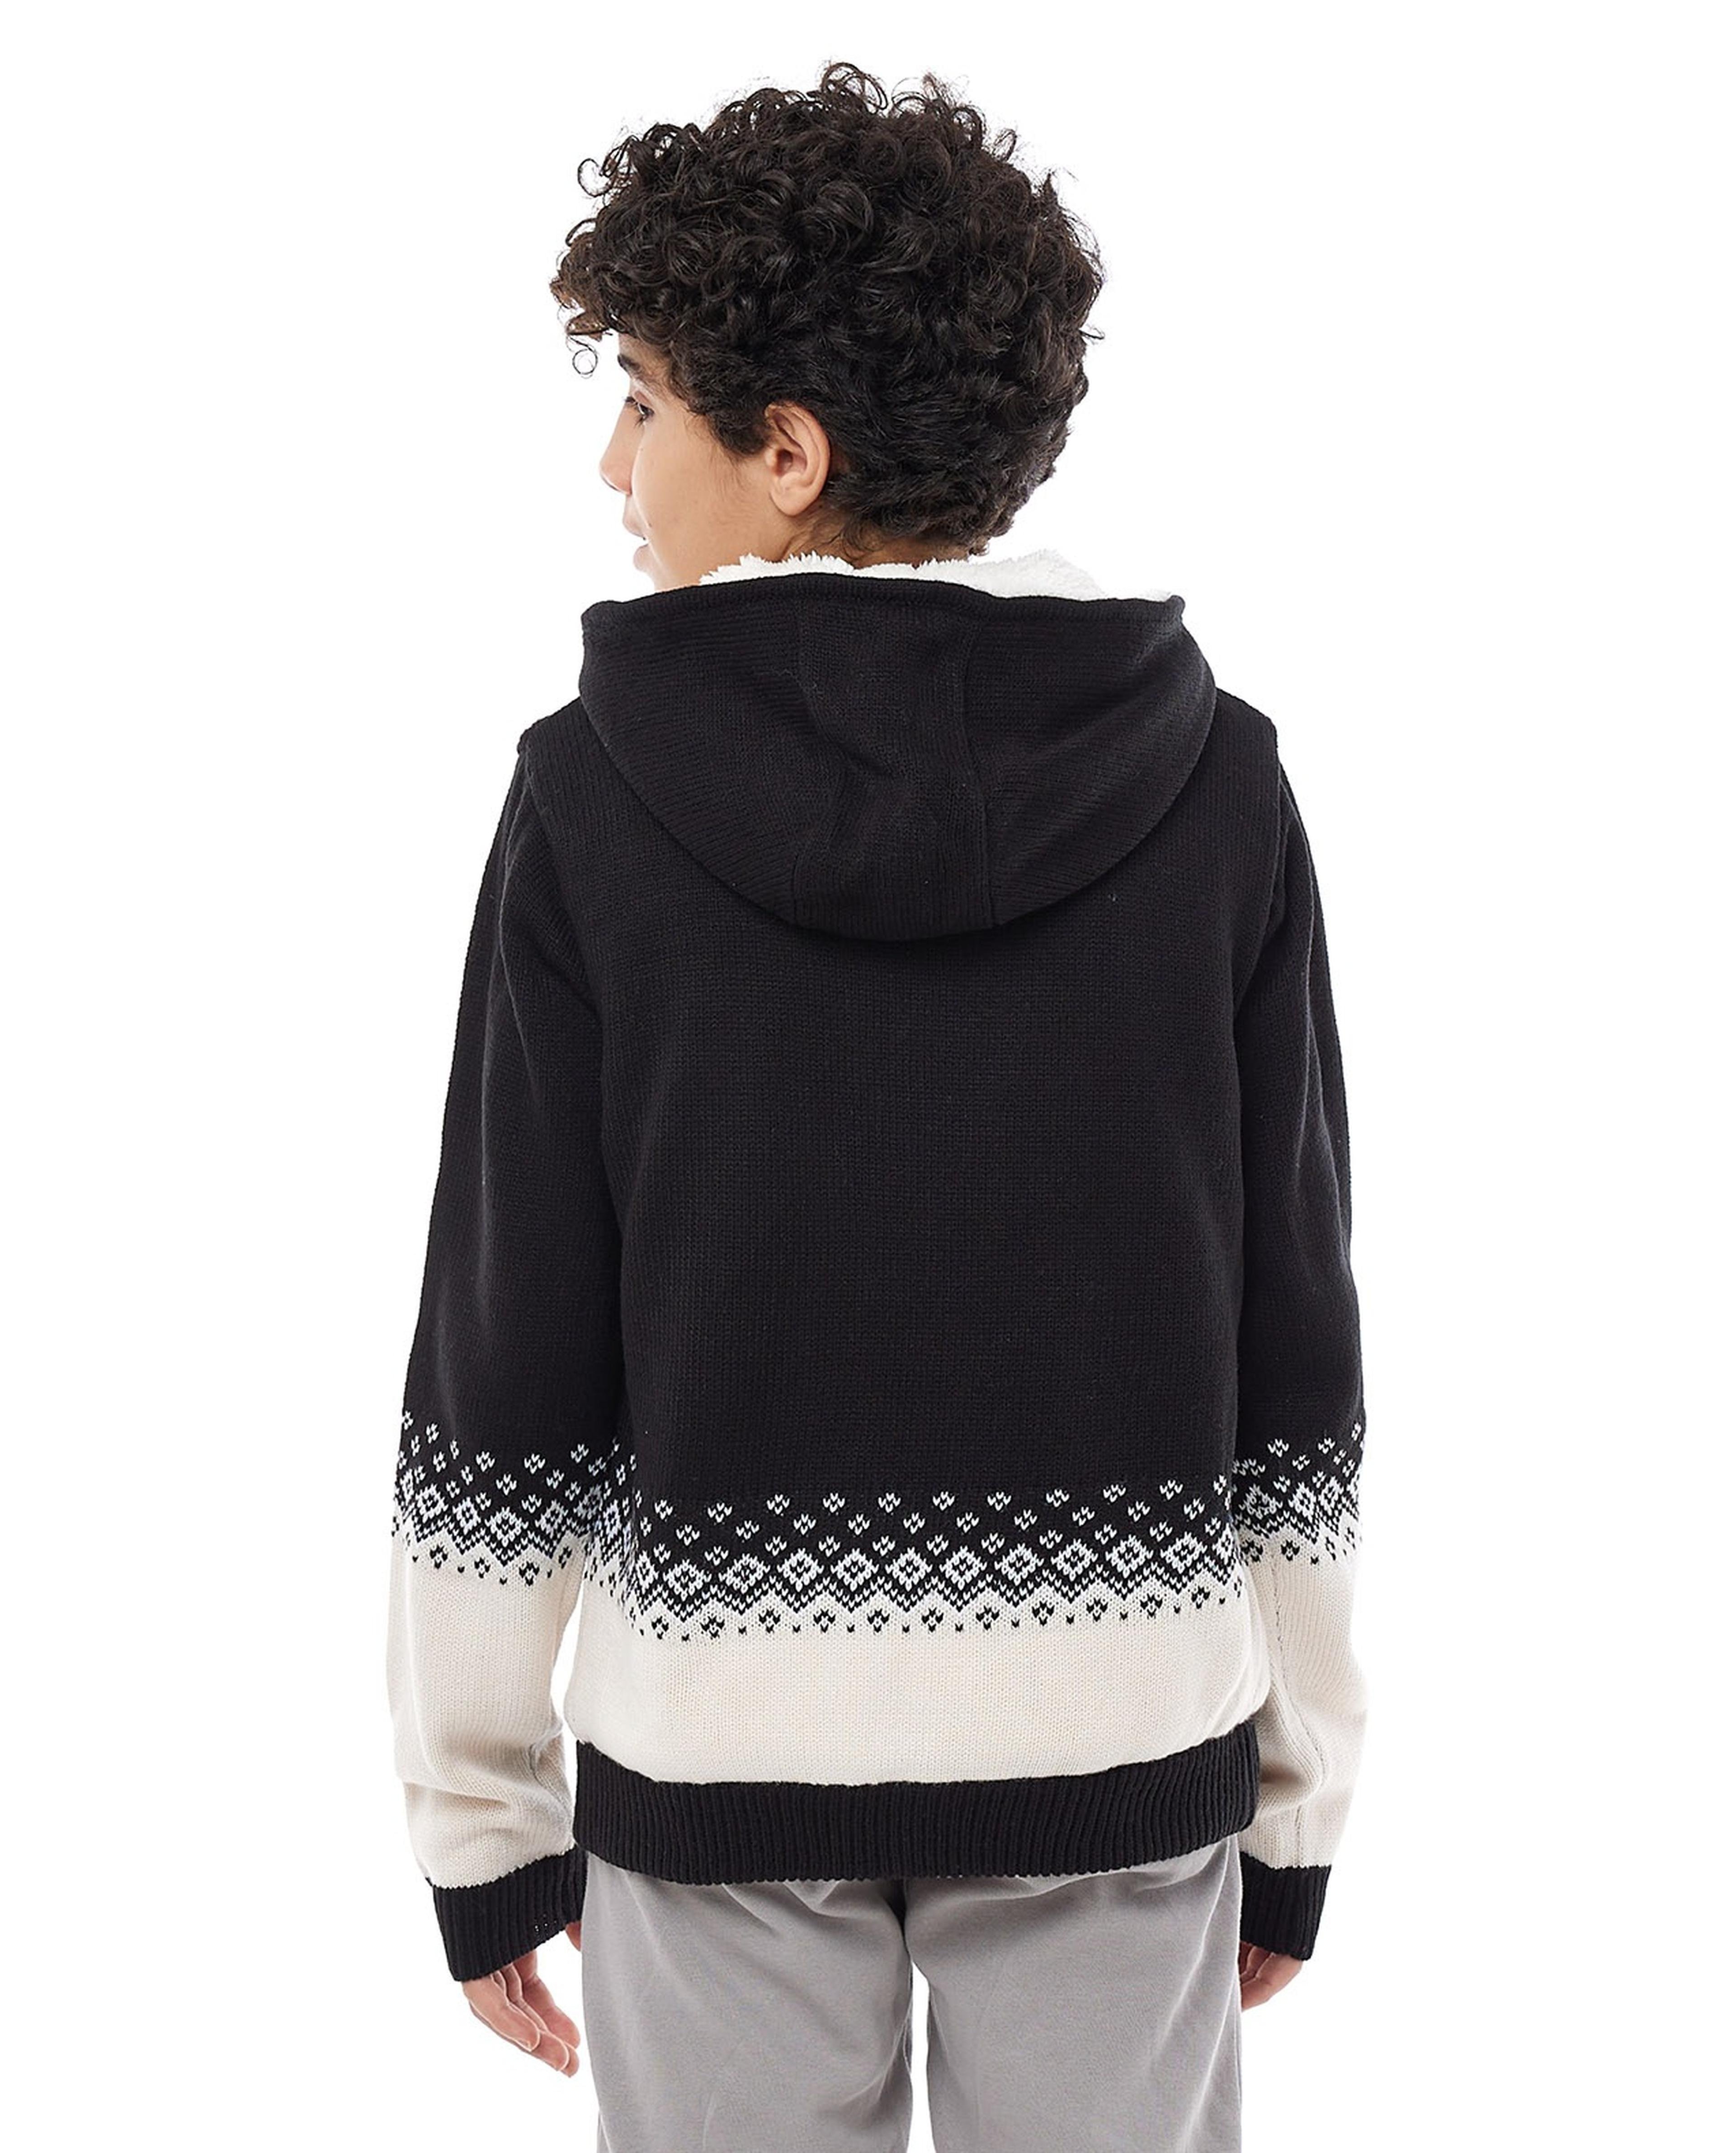 Patterned Cardigan with Zipper Closure